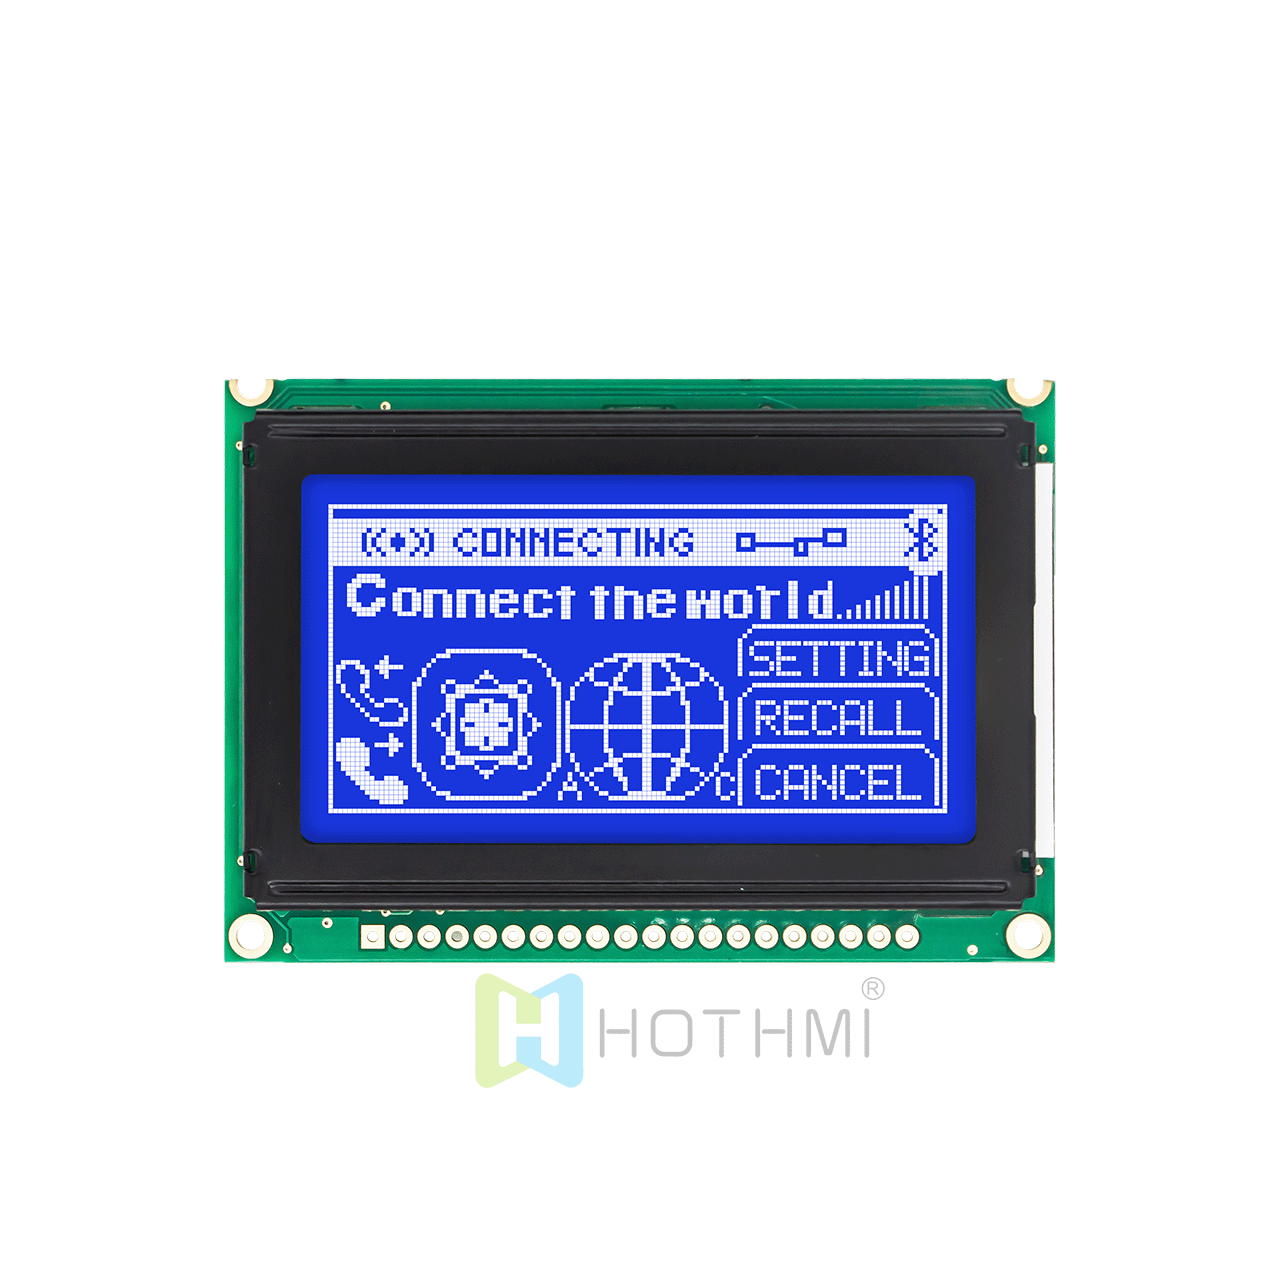 2.7 inch STN Negative Display Blue Background White Characters 128x64 Graphic LCD Display Module, MCU, for Arduino